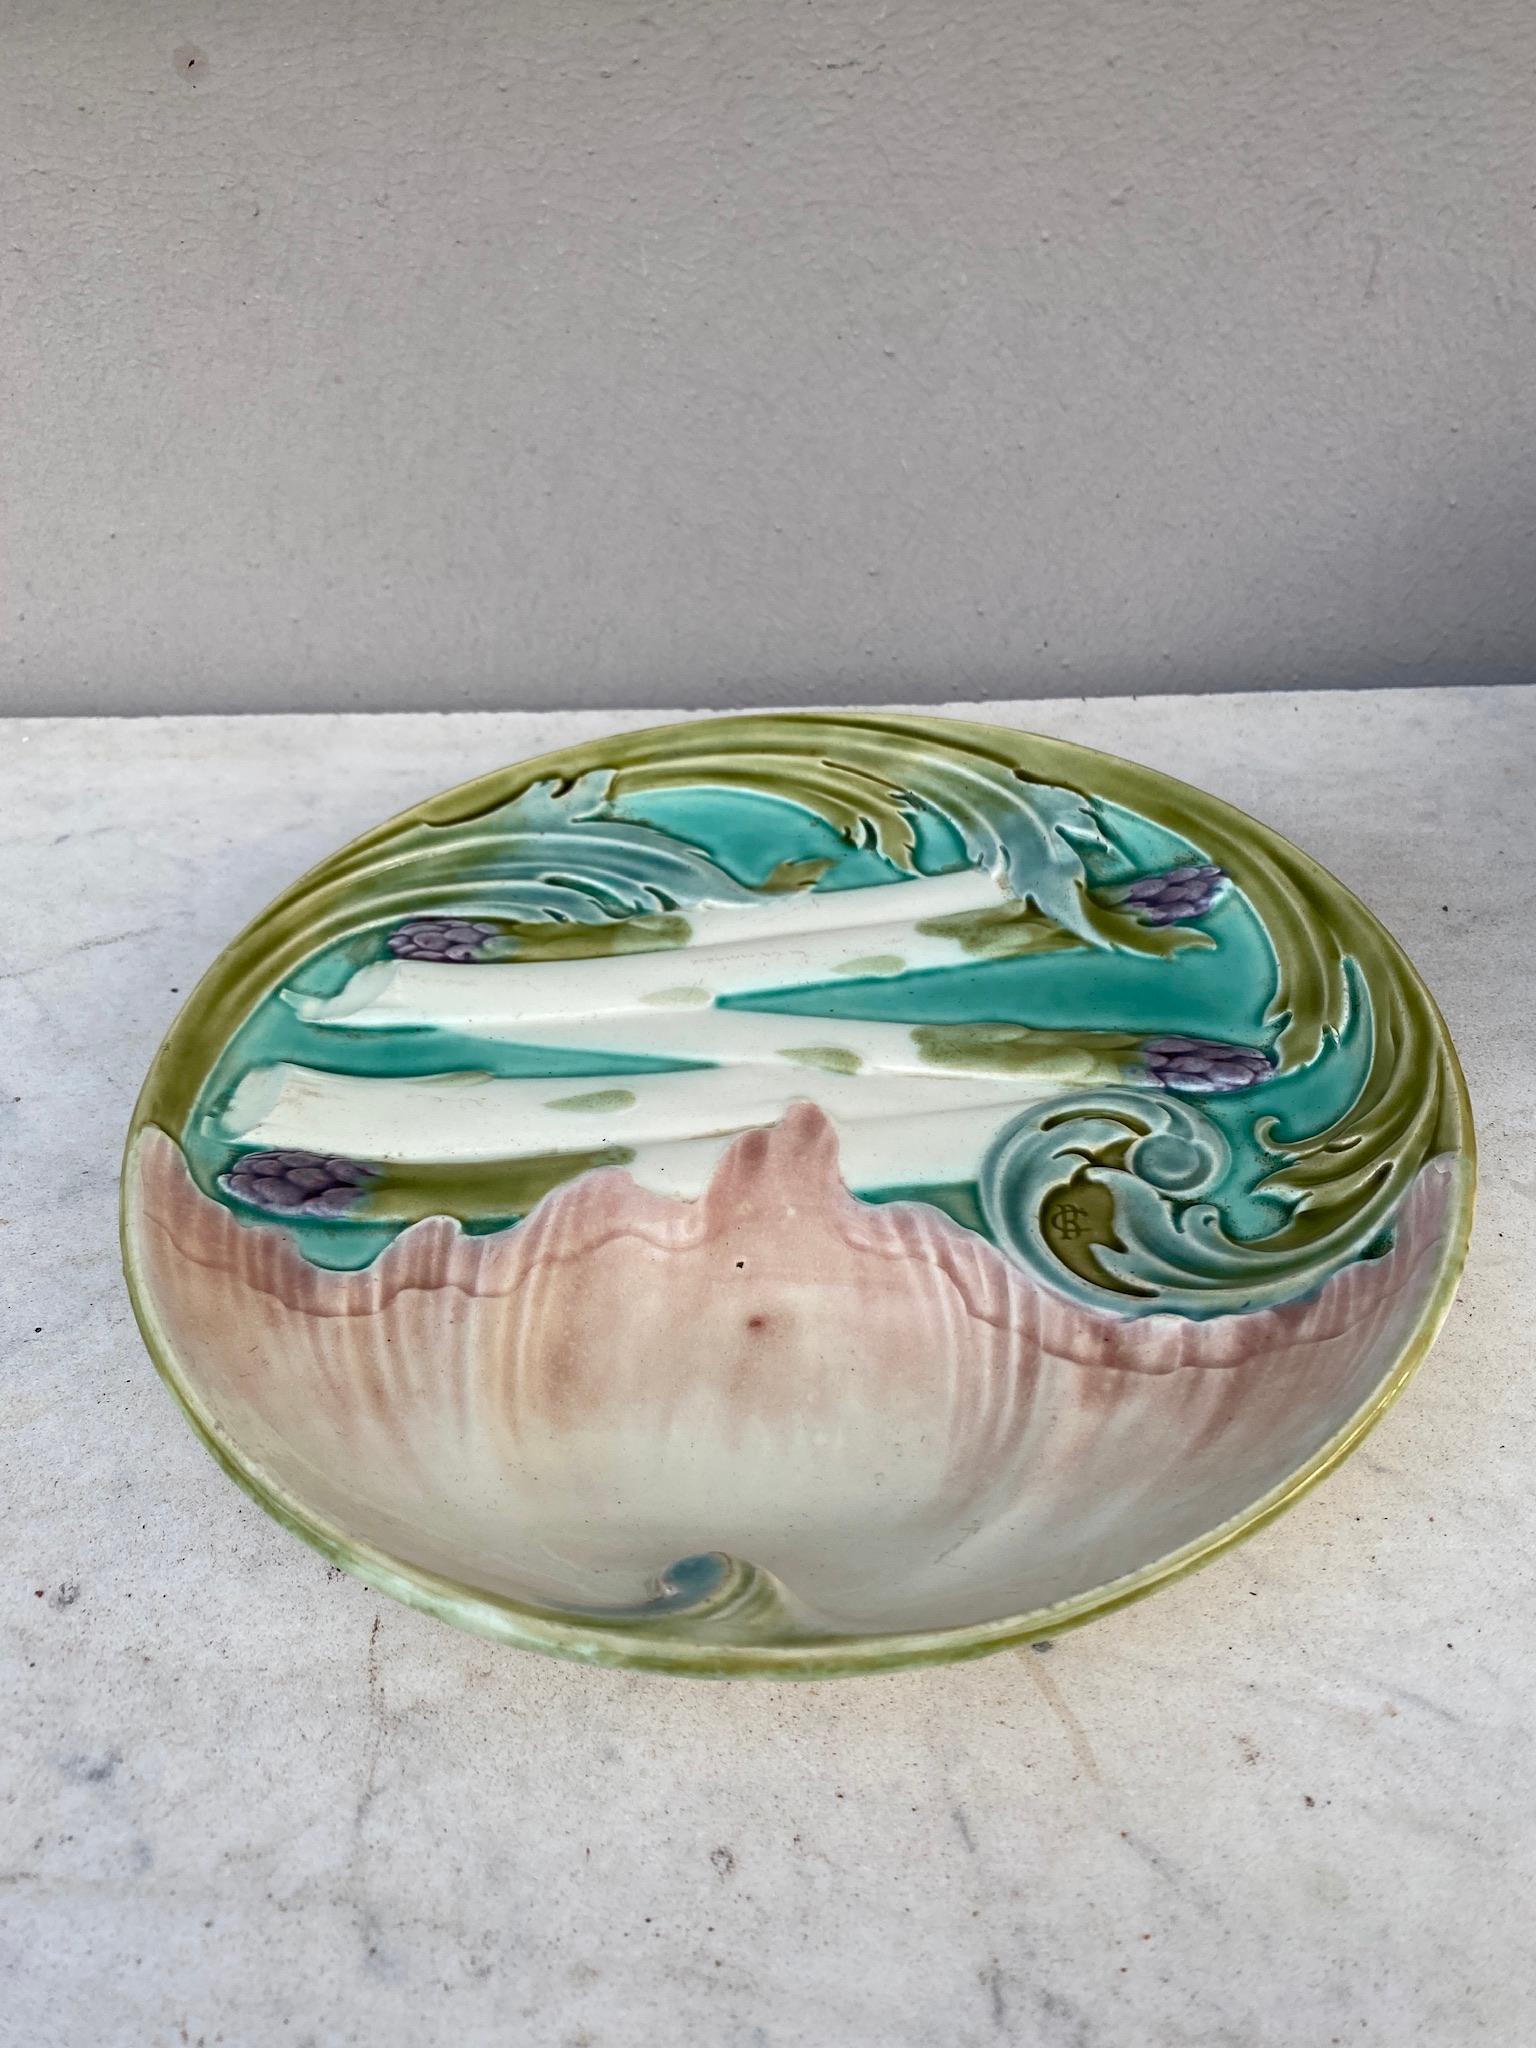 Large Majolica asparagus plate signed Keller et Guerin Luneville, circa 1880.
This plate exist in different colors and sizes.